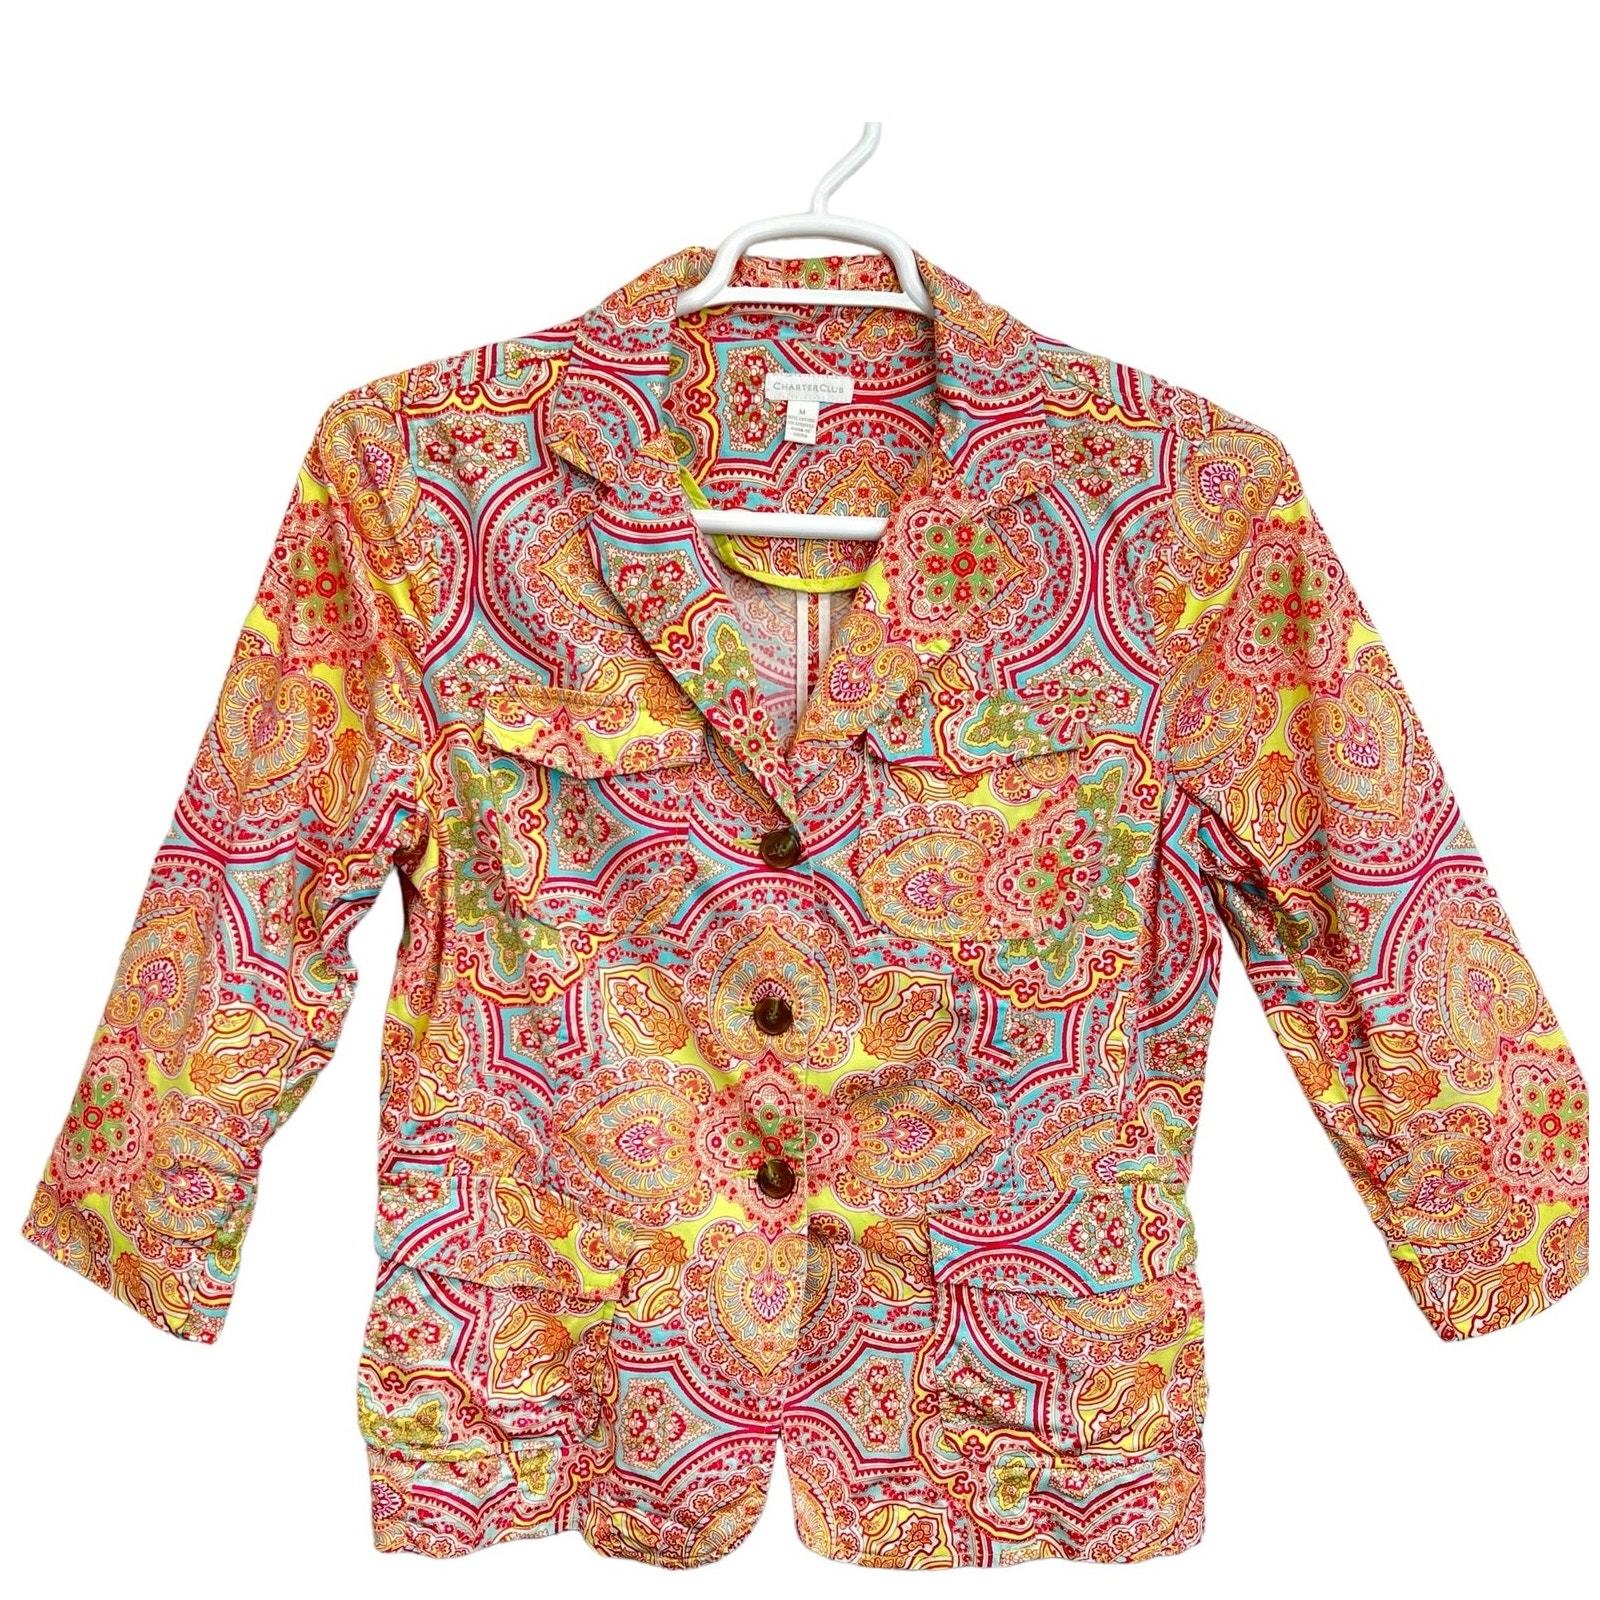 Primary image for Charter Club Paisley Blazer Jacket Multicolor Size M 3 Button Front 3/4 Sleeve 